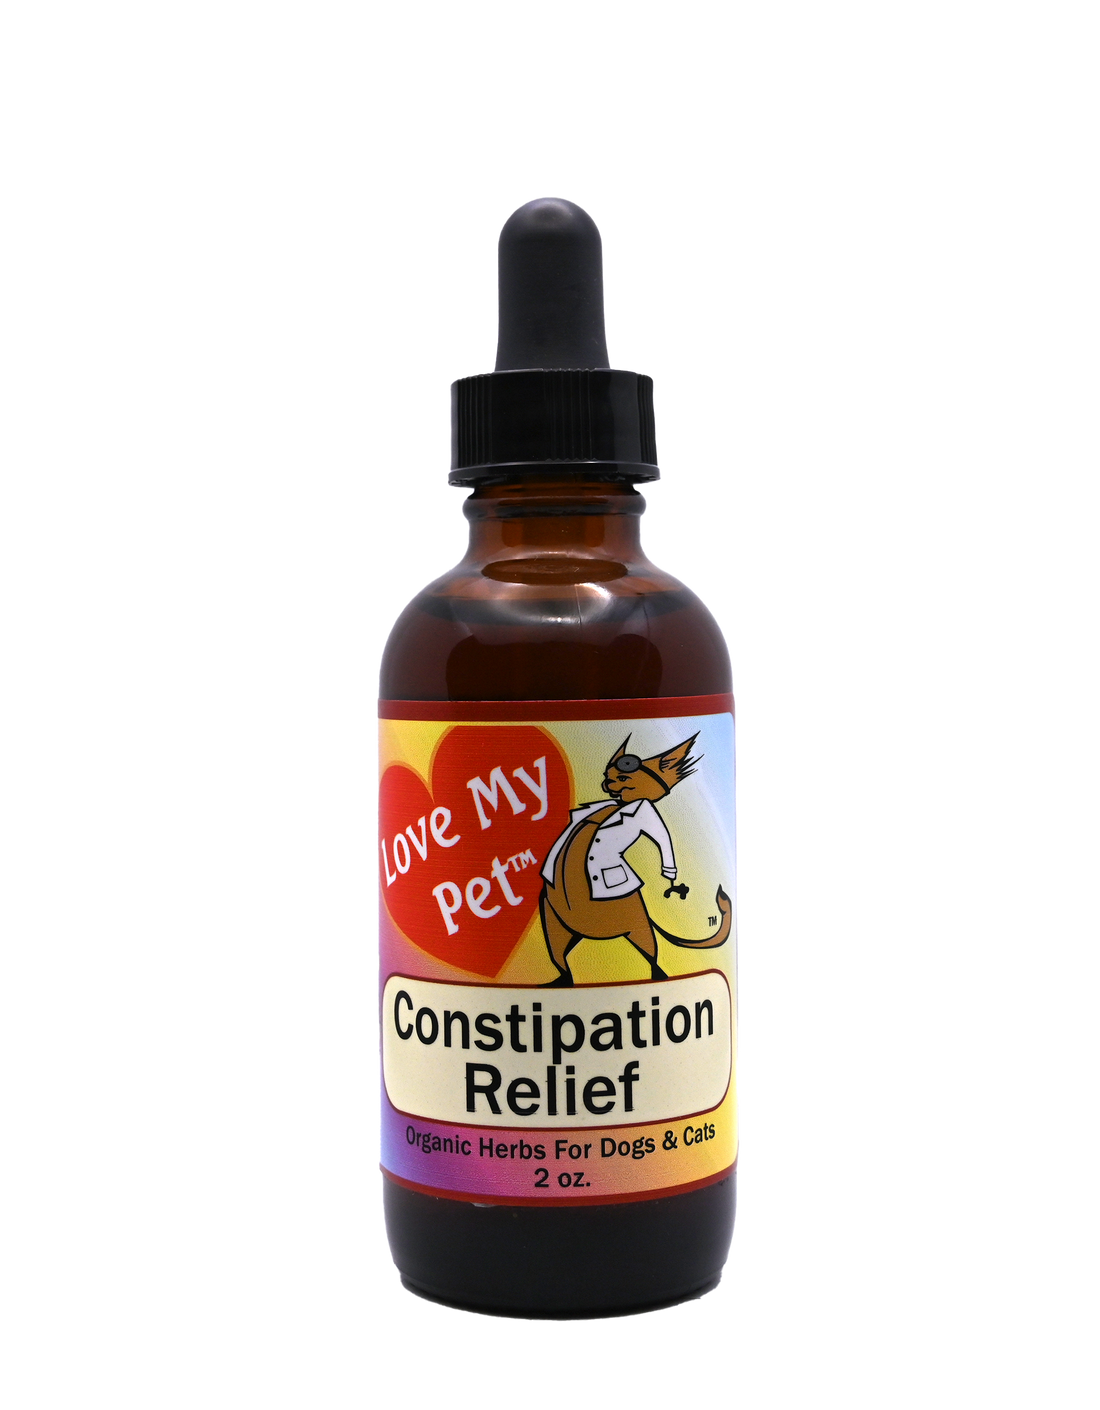 LoveMyPet Constipation Relief